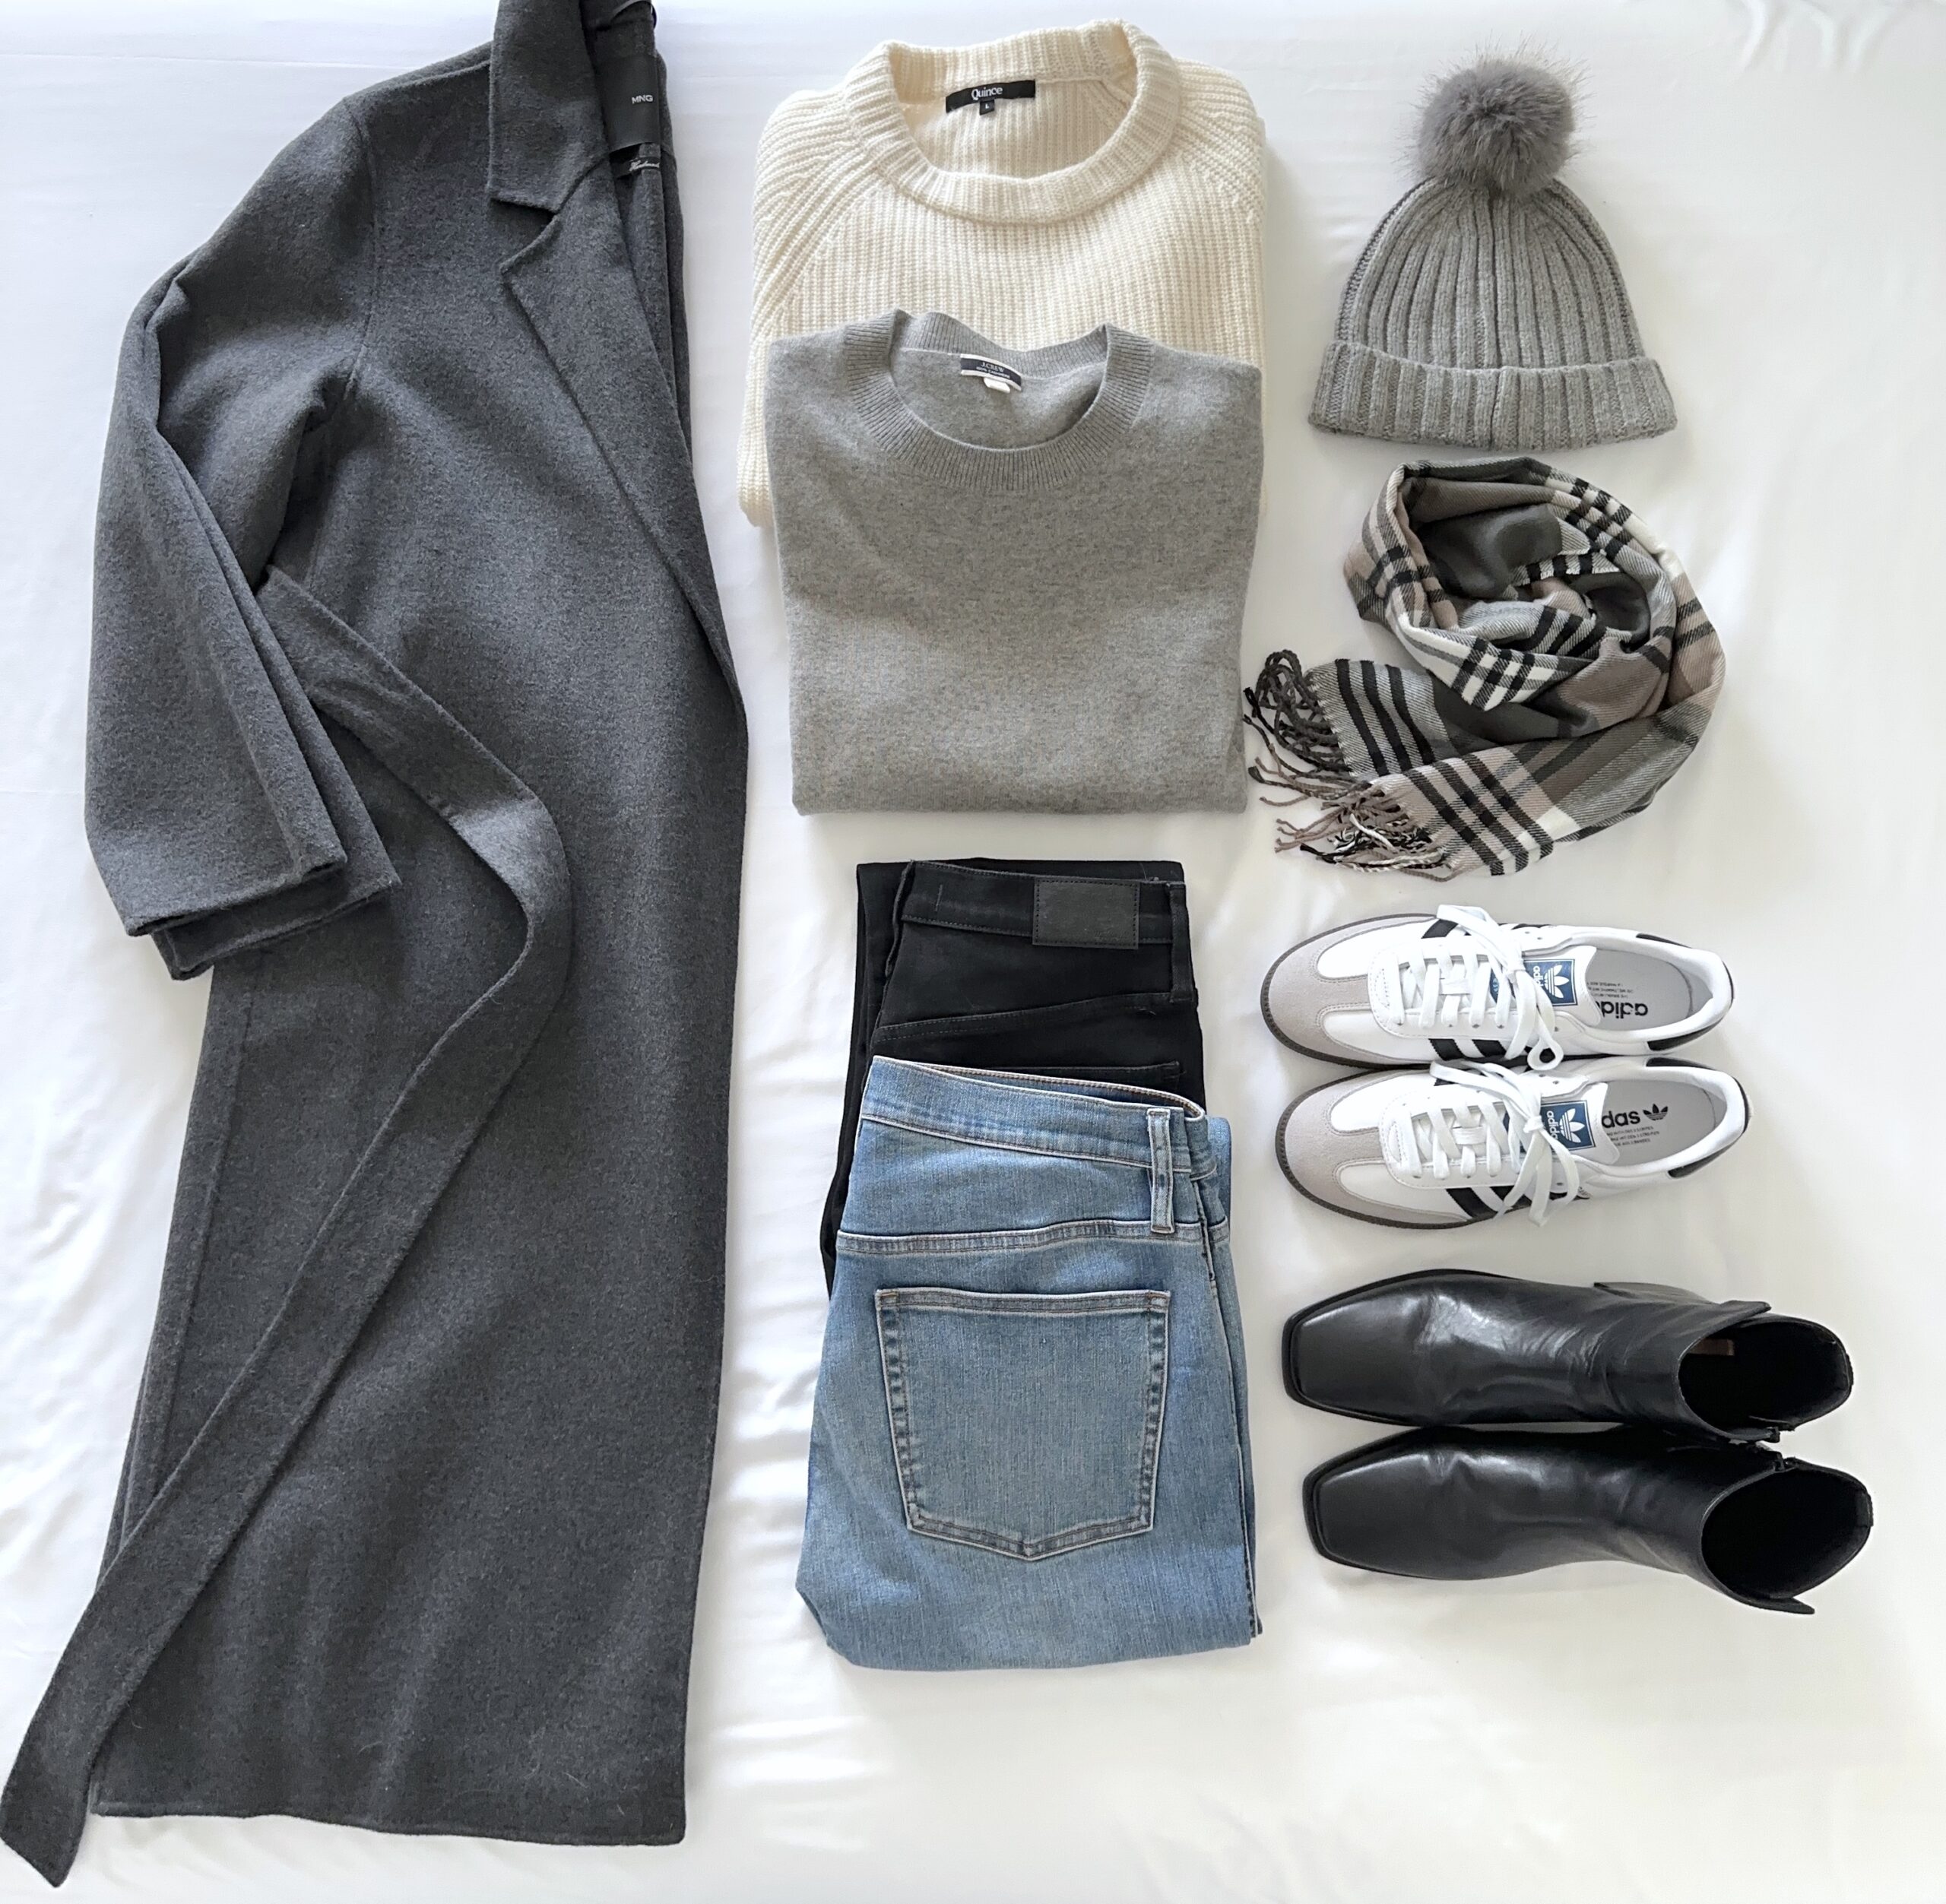 How To Mix And Match Winter Essentials With A Gray Coat - Classy Yet Trendy